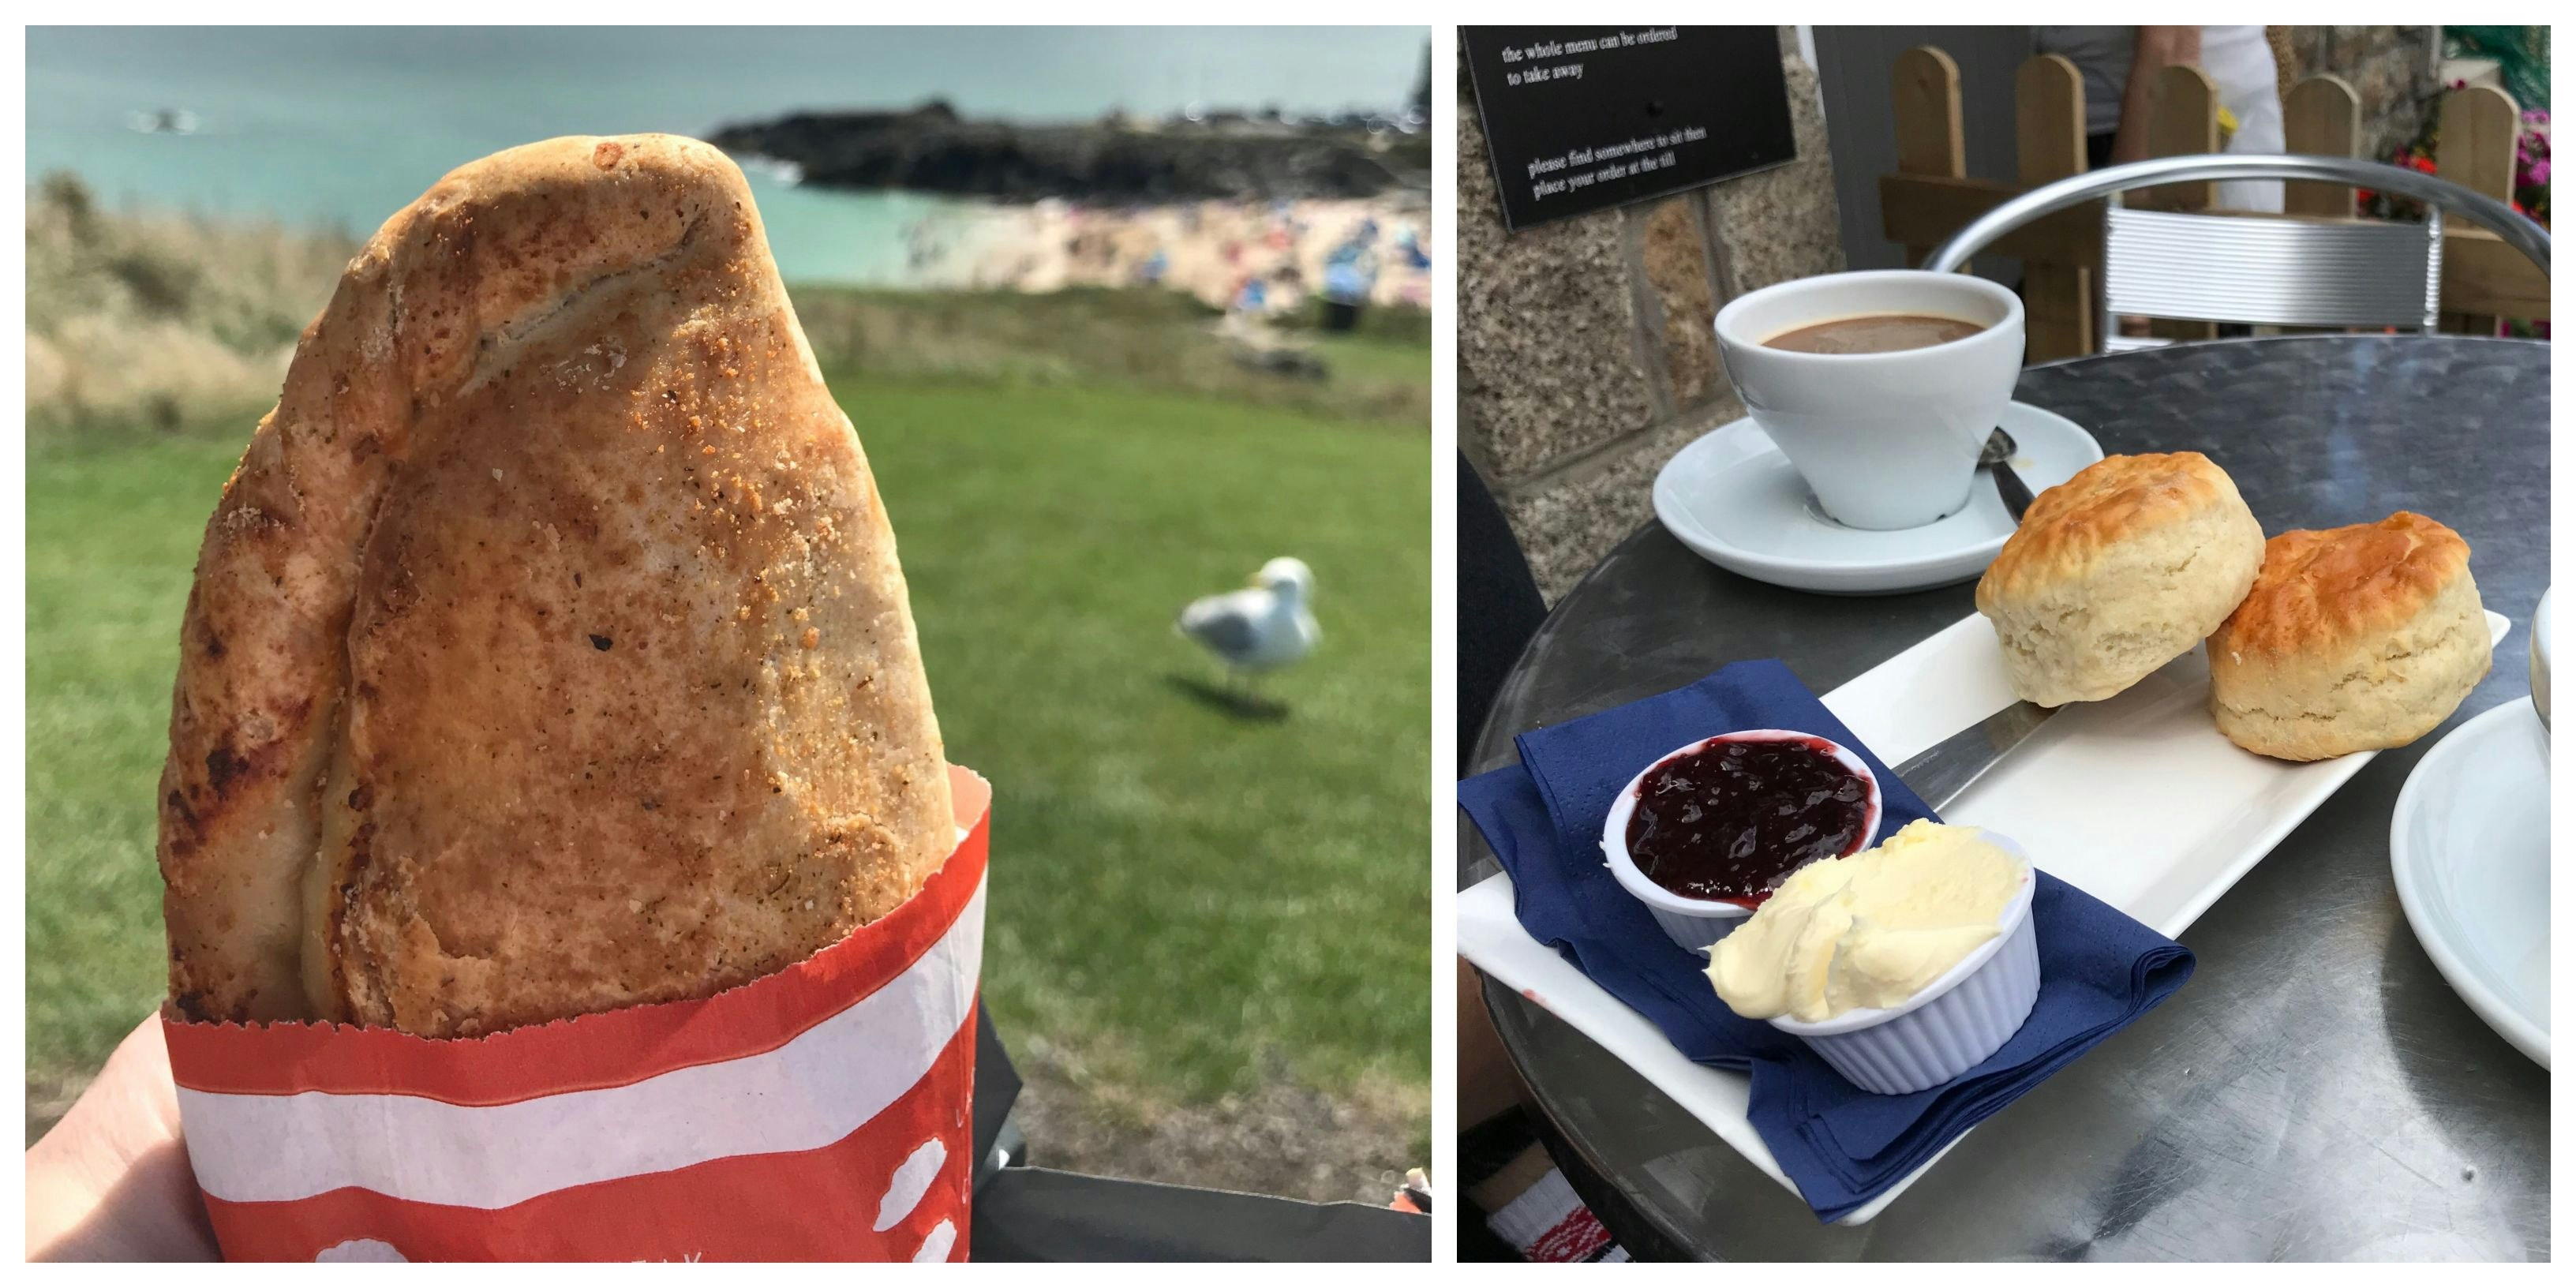 On the left is a close up of a Cornish pasty in red and white wrapping with the sea in the background. On the right, a coffee, two scones, jam and cream